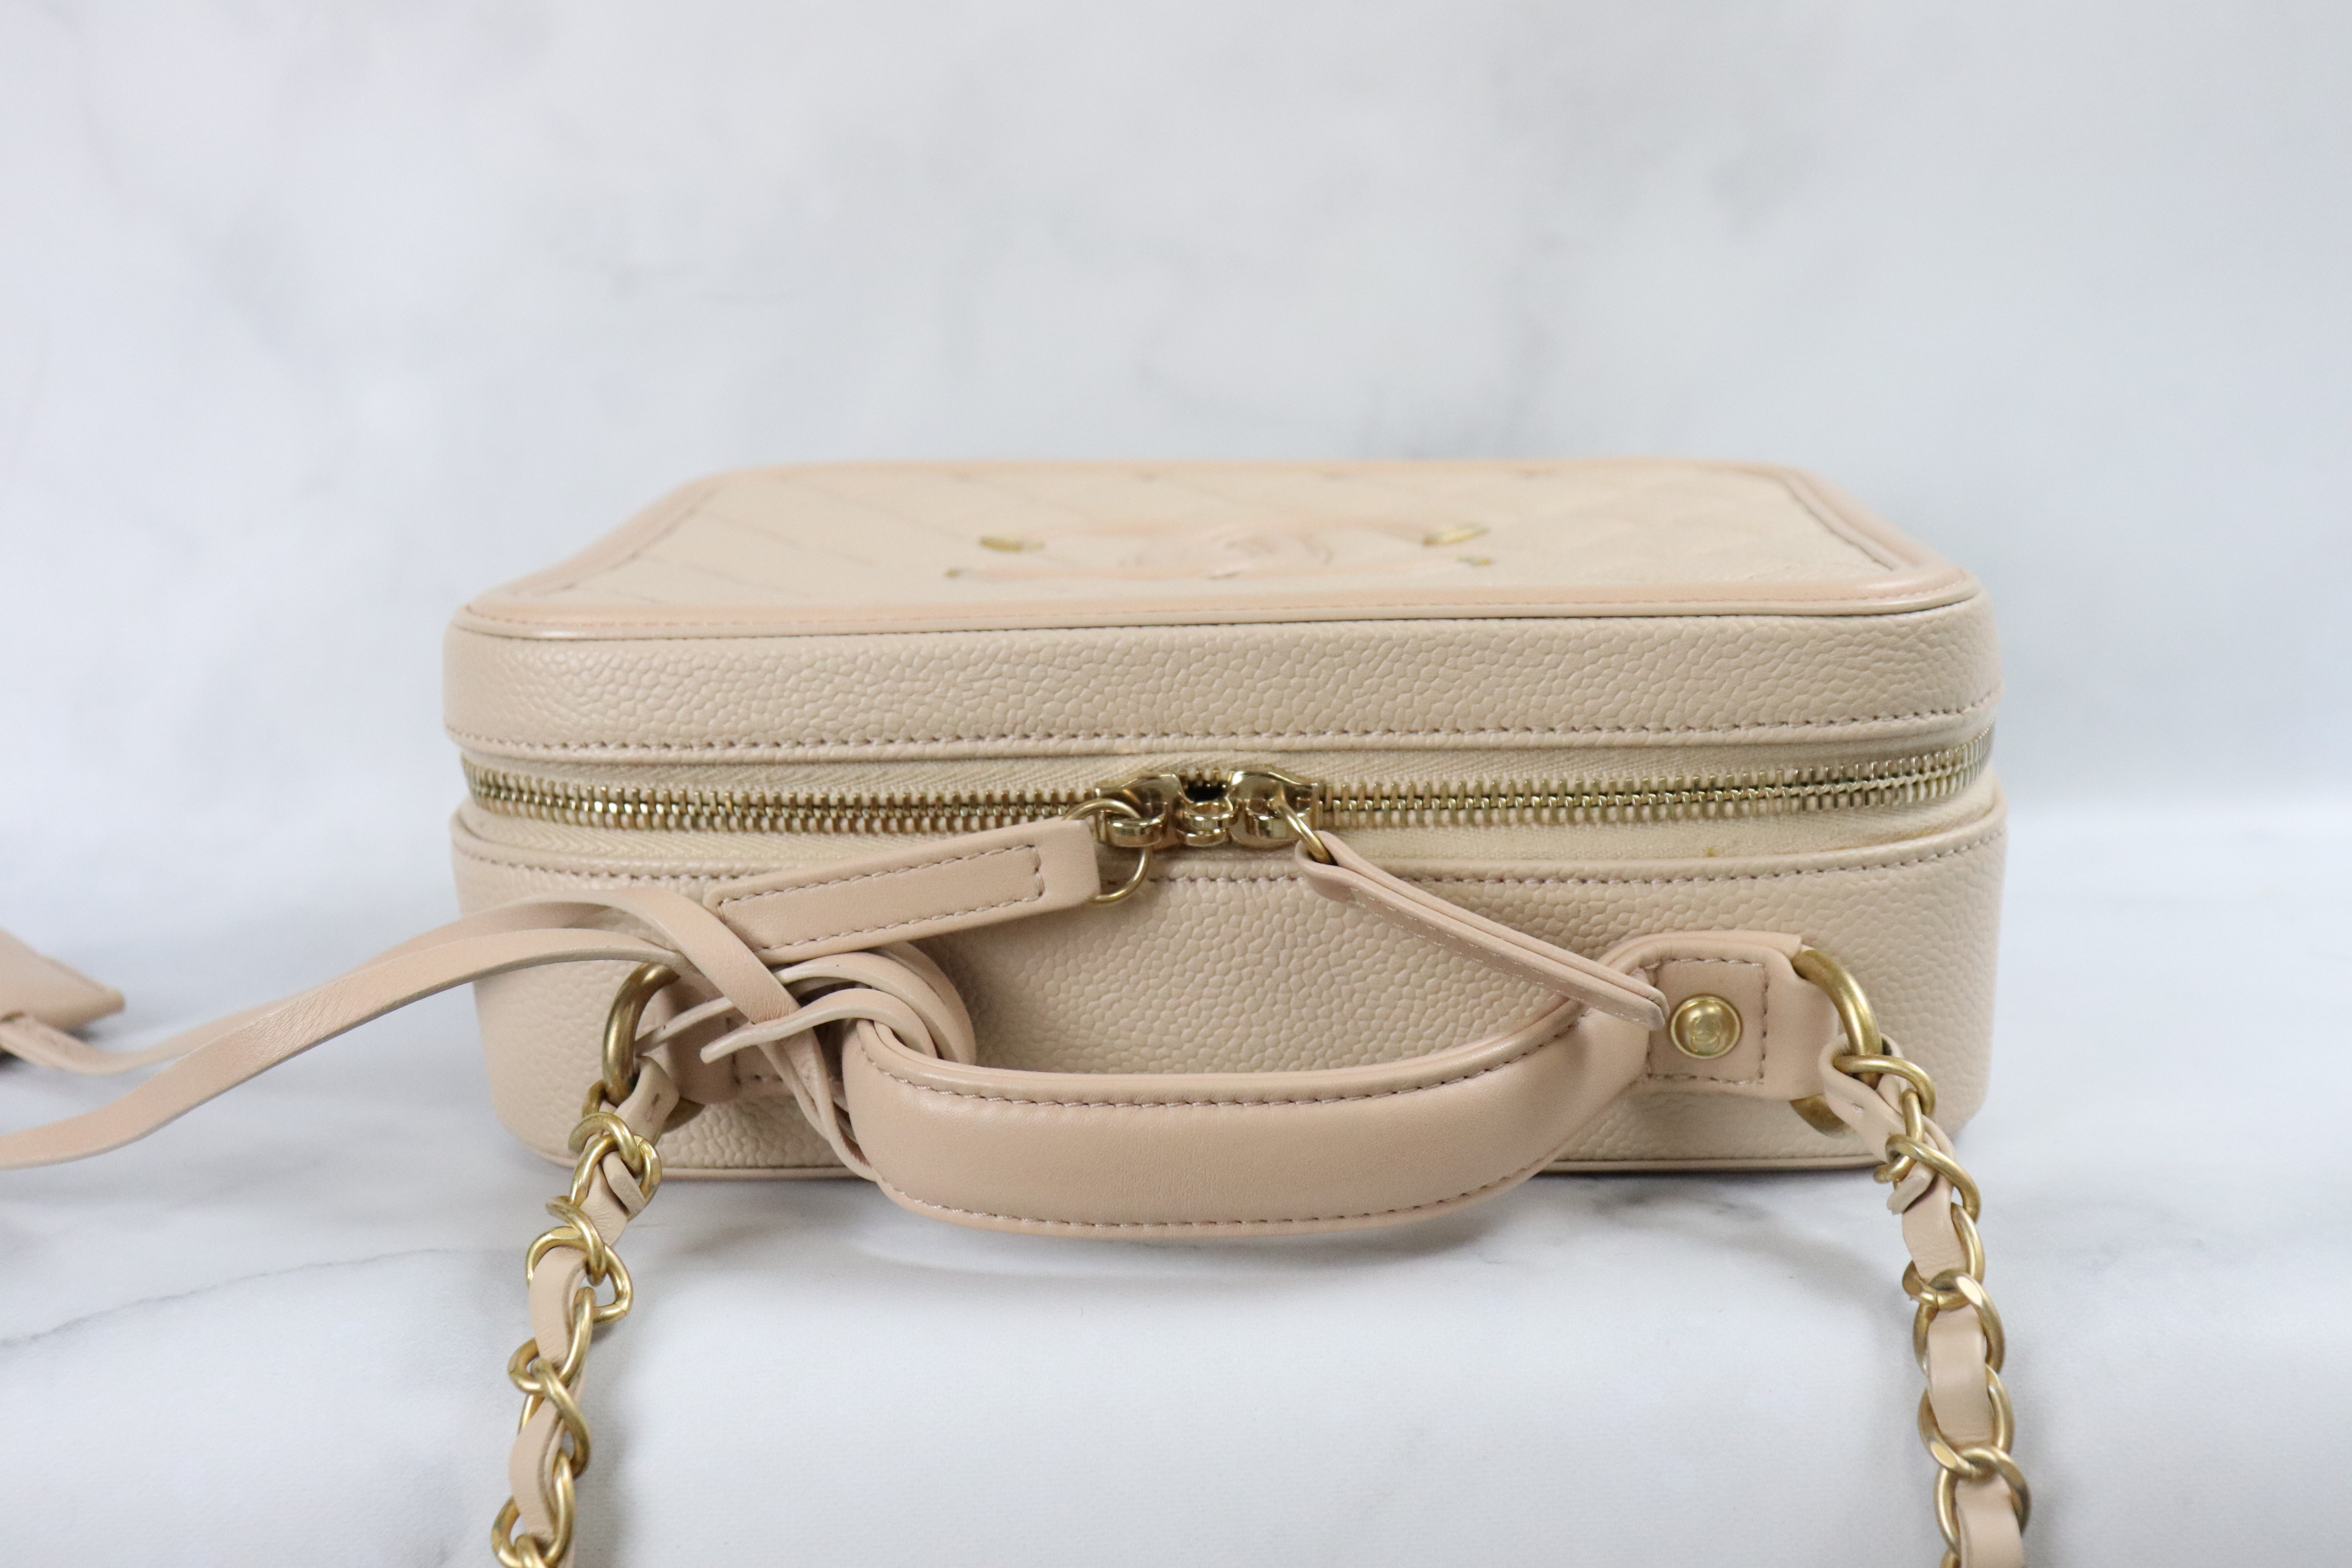 Chanel Filigree Vanity Case, Medium, Beige Caviar Leather, Brushed Gold  Hardware, Preowned with Box